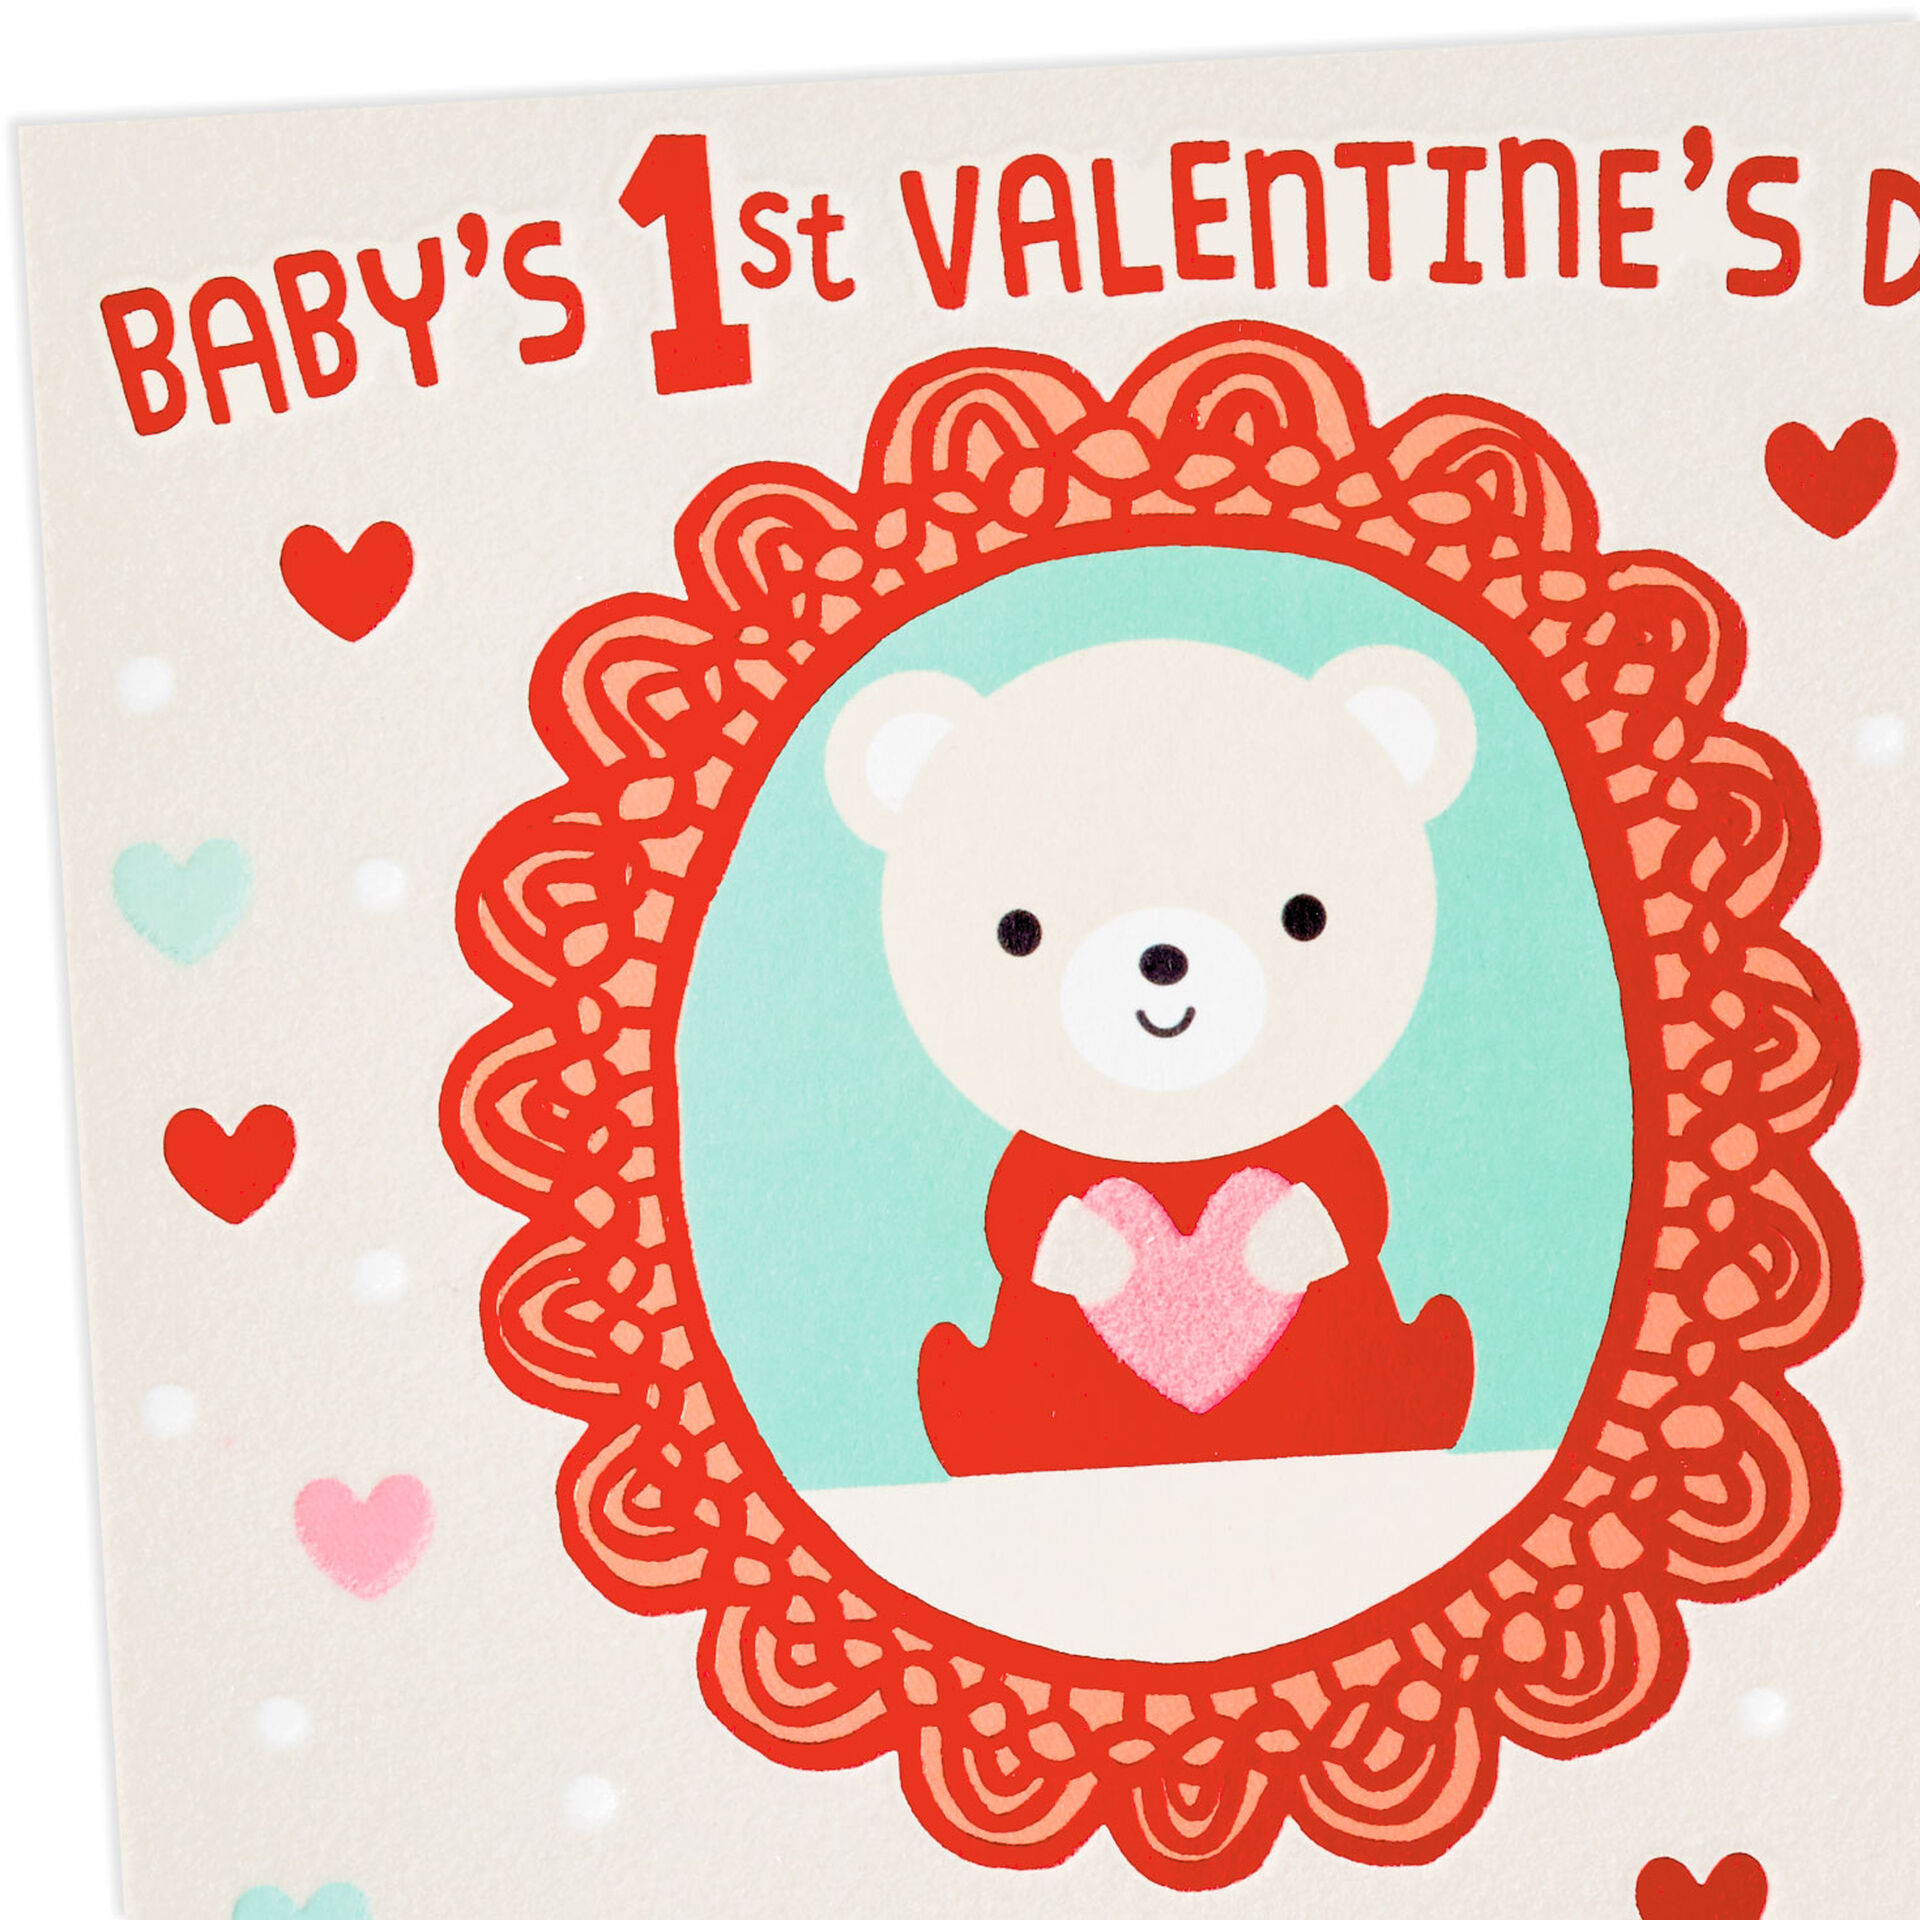 sweetest-snuggles-baby-s-first-valentine-s-day-card-greeting-cards